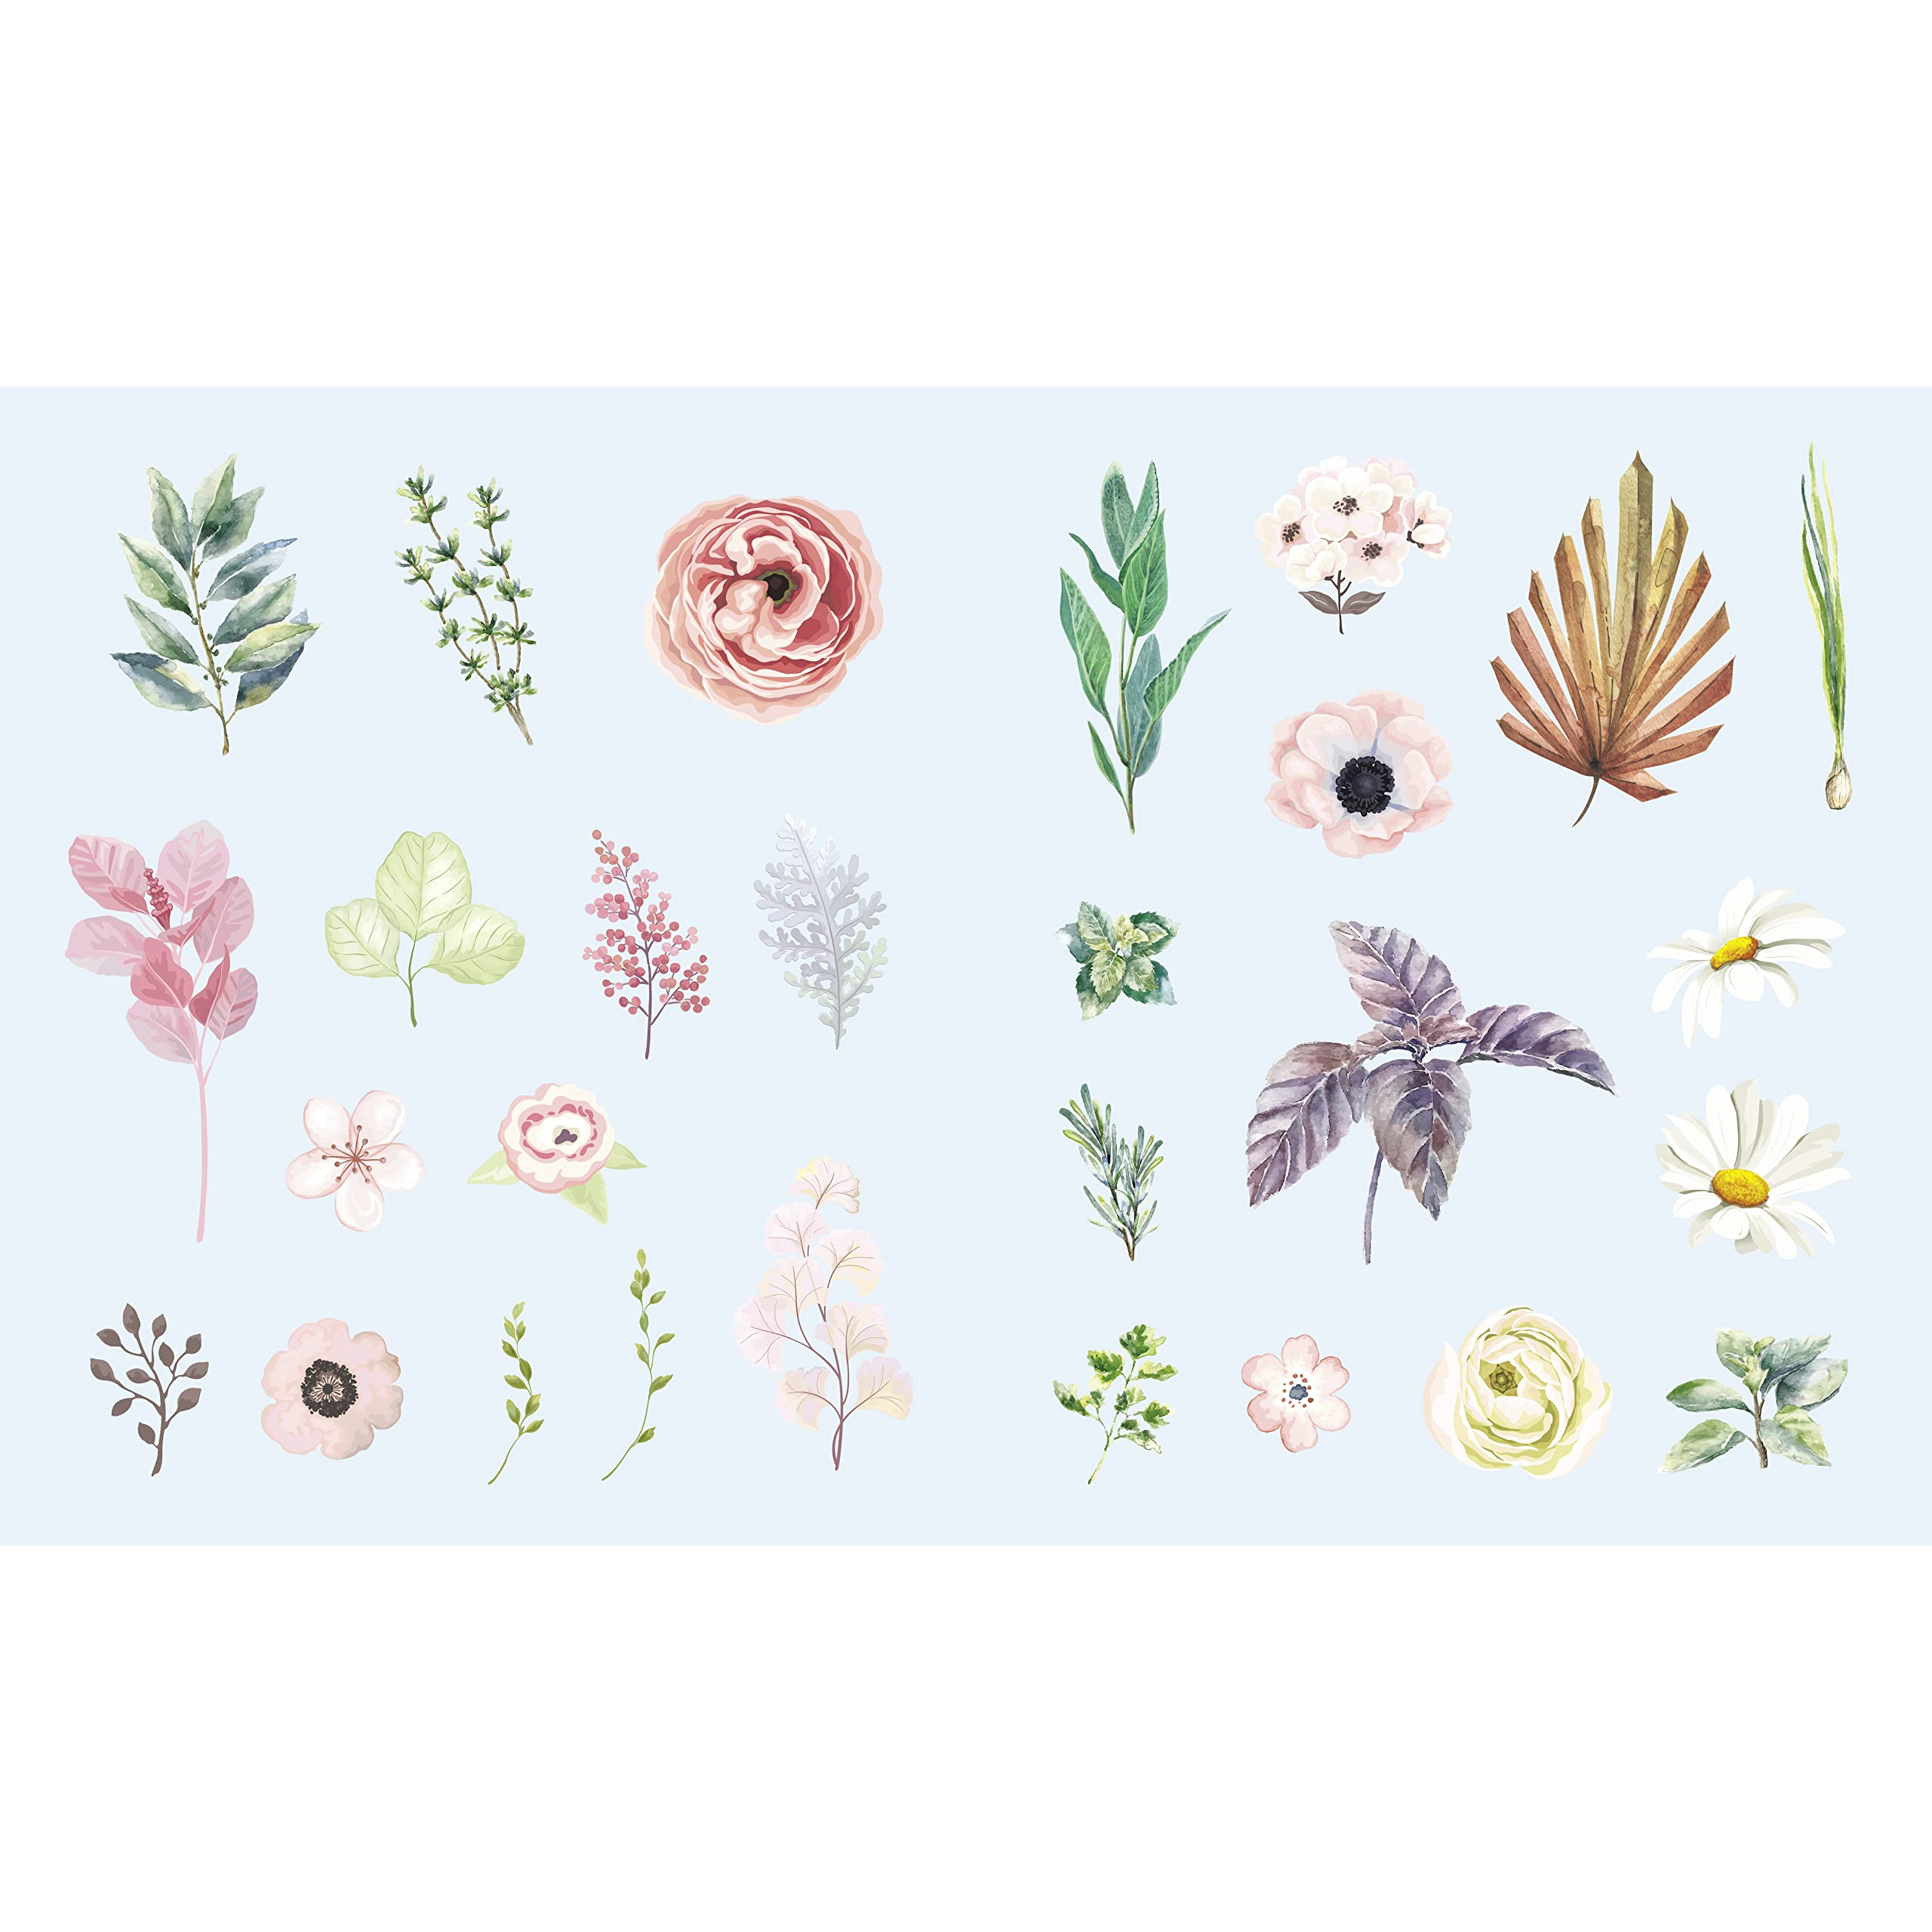 sticker-studio-flora-a-sticker-gallery-of-beautiful-blooms-hardcover-beauty-of-flowers-and-foliage-with-850-stickers